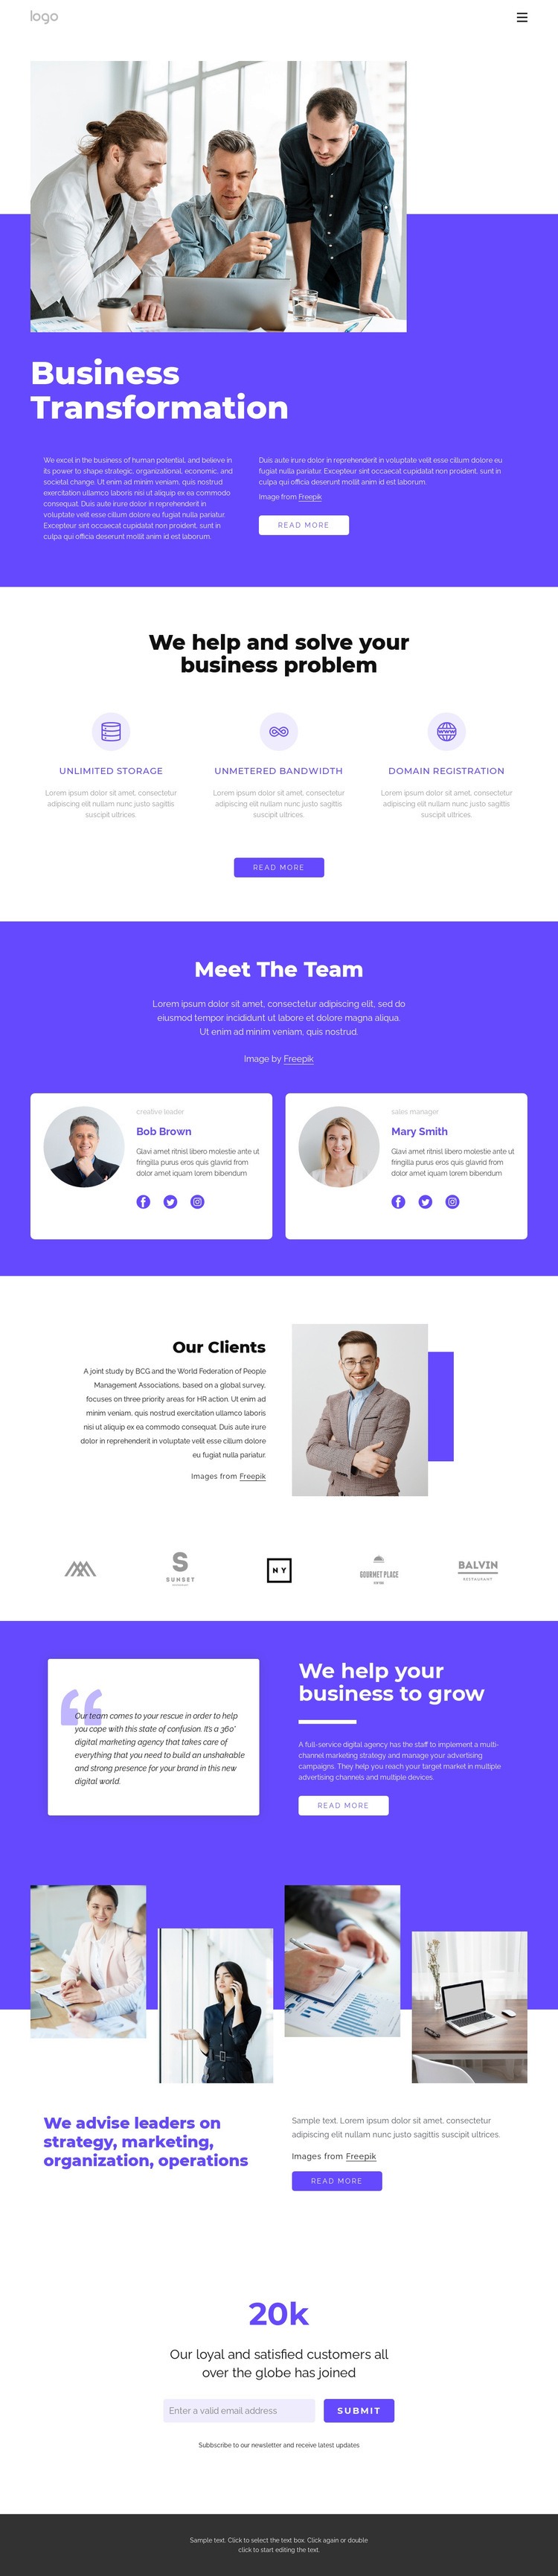 Global management consulting firm Elementor Template Alternative